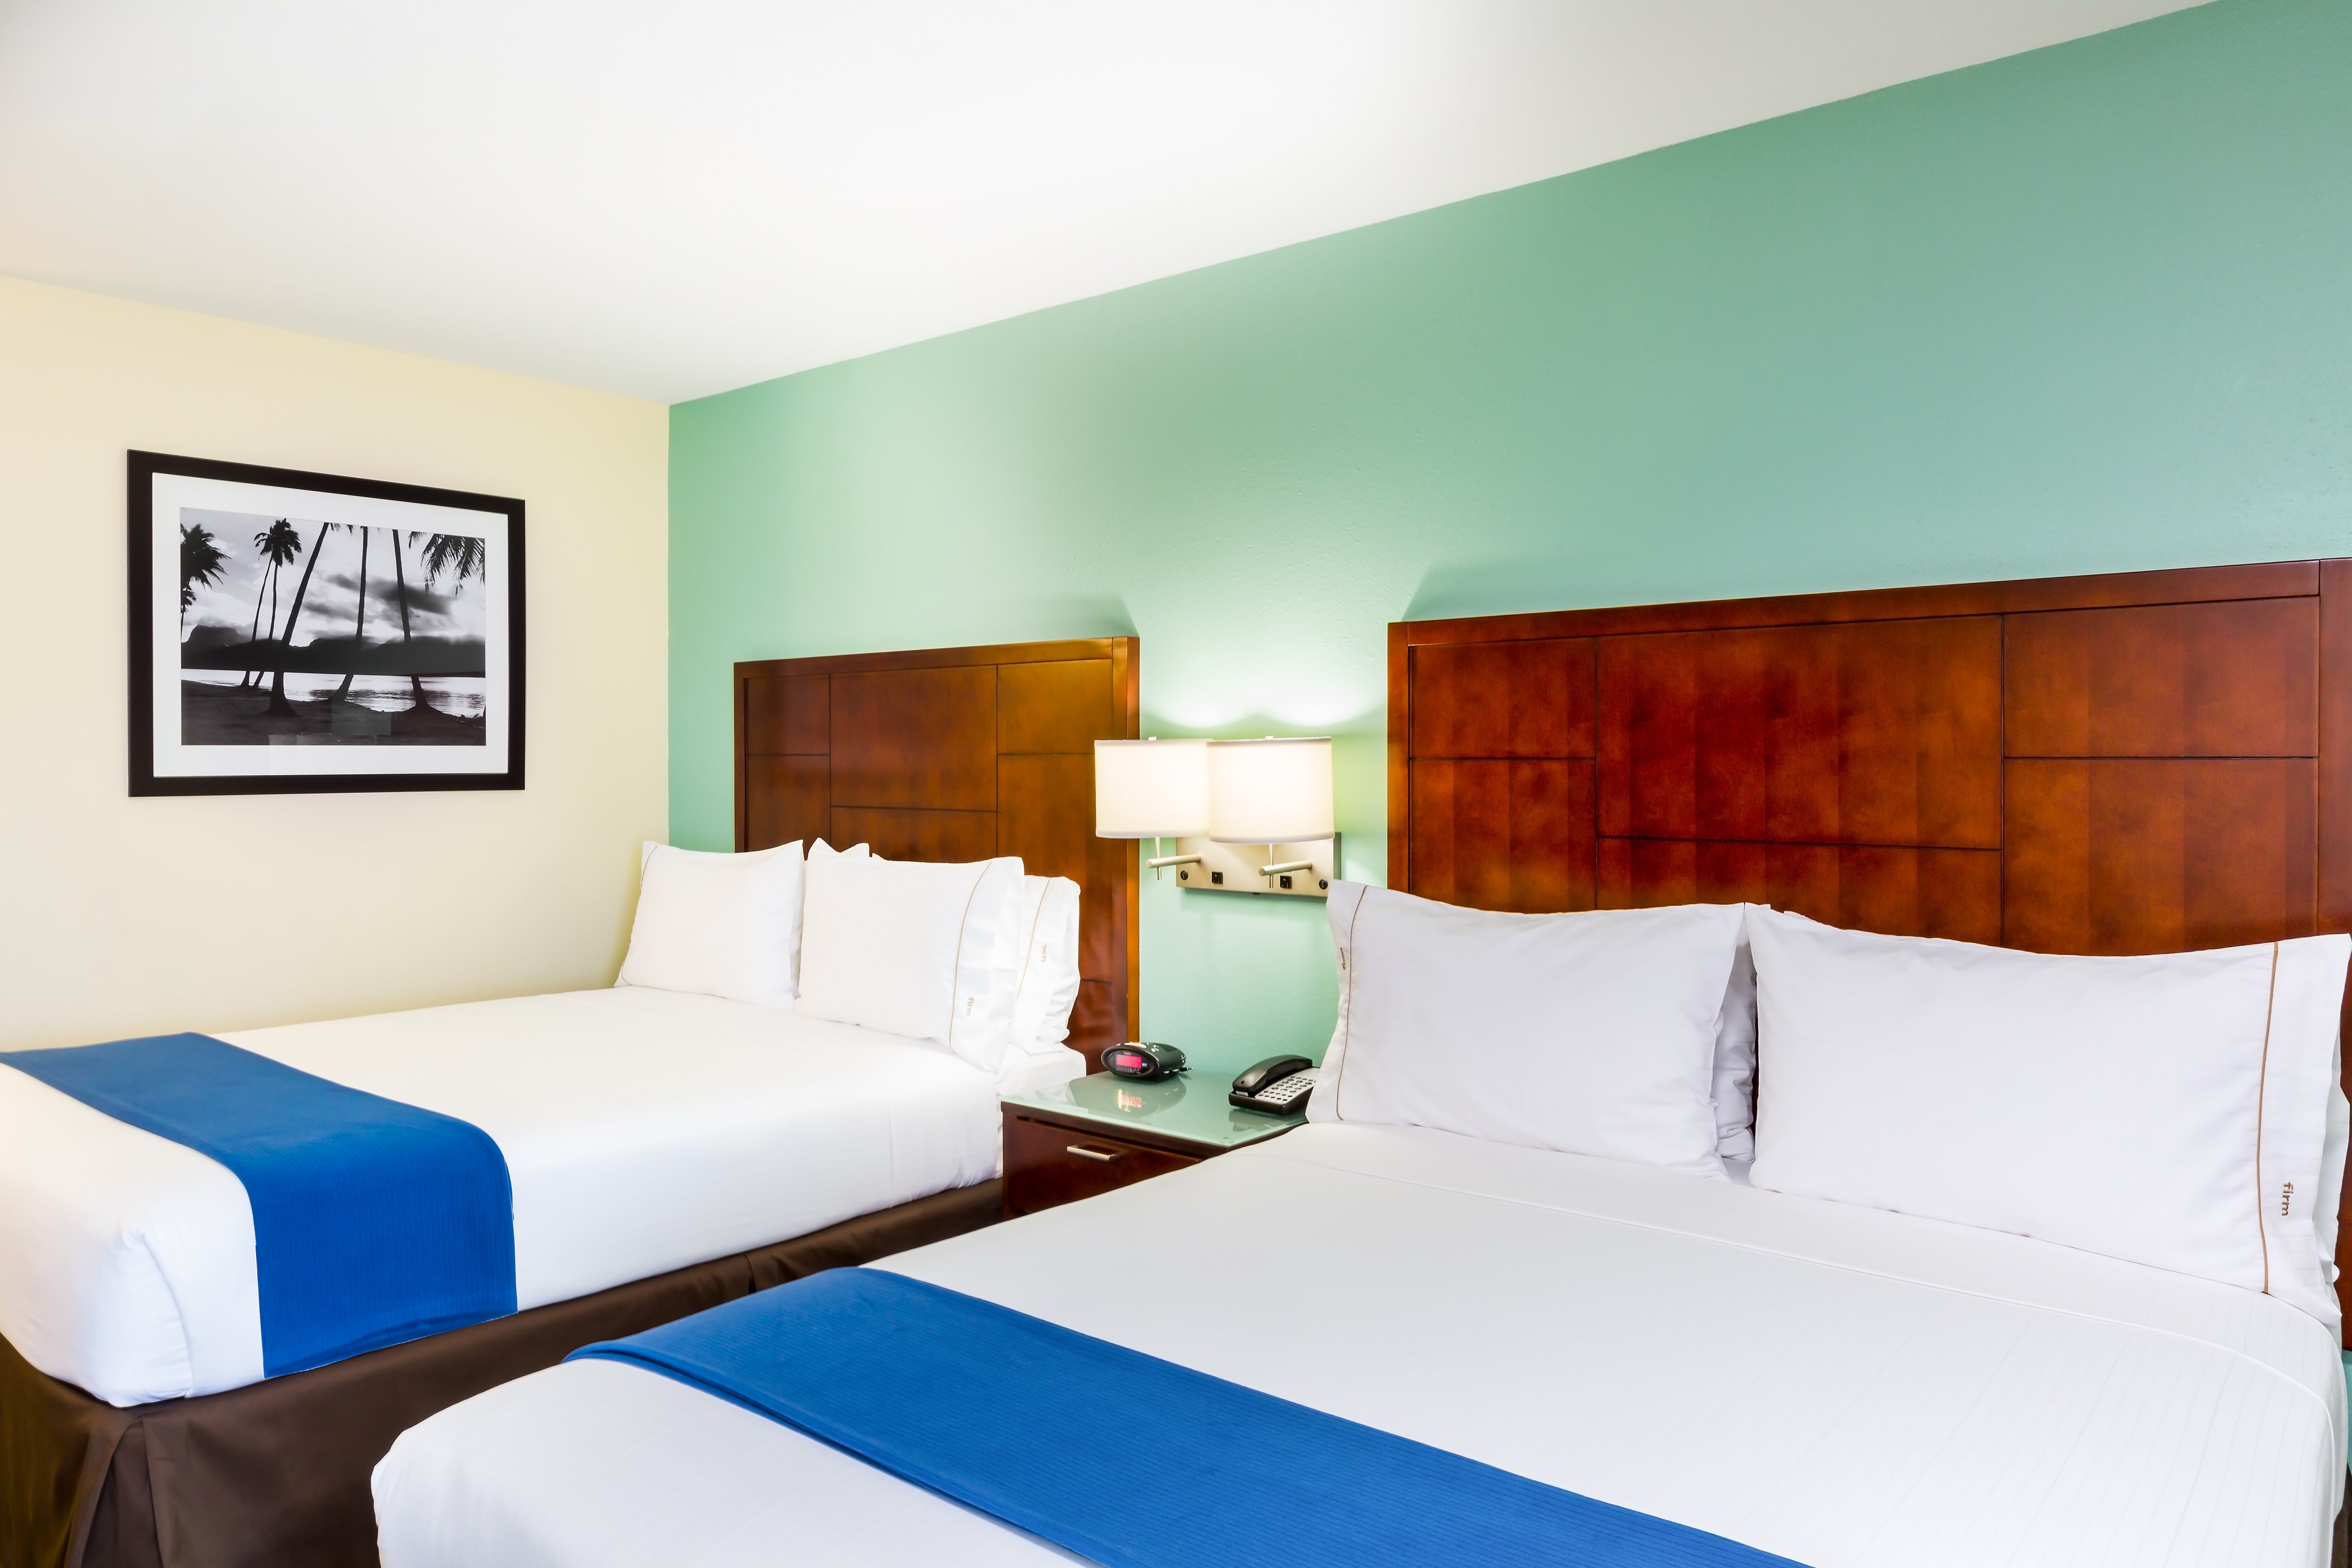 Double Bed Guest Rooms are ideal for family or business travelers.